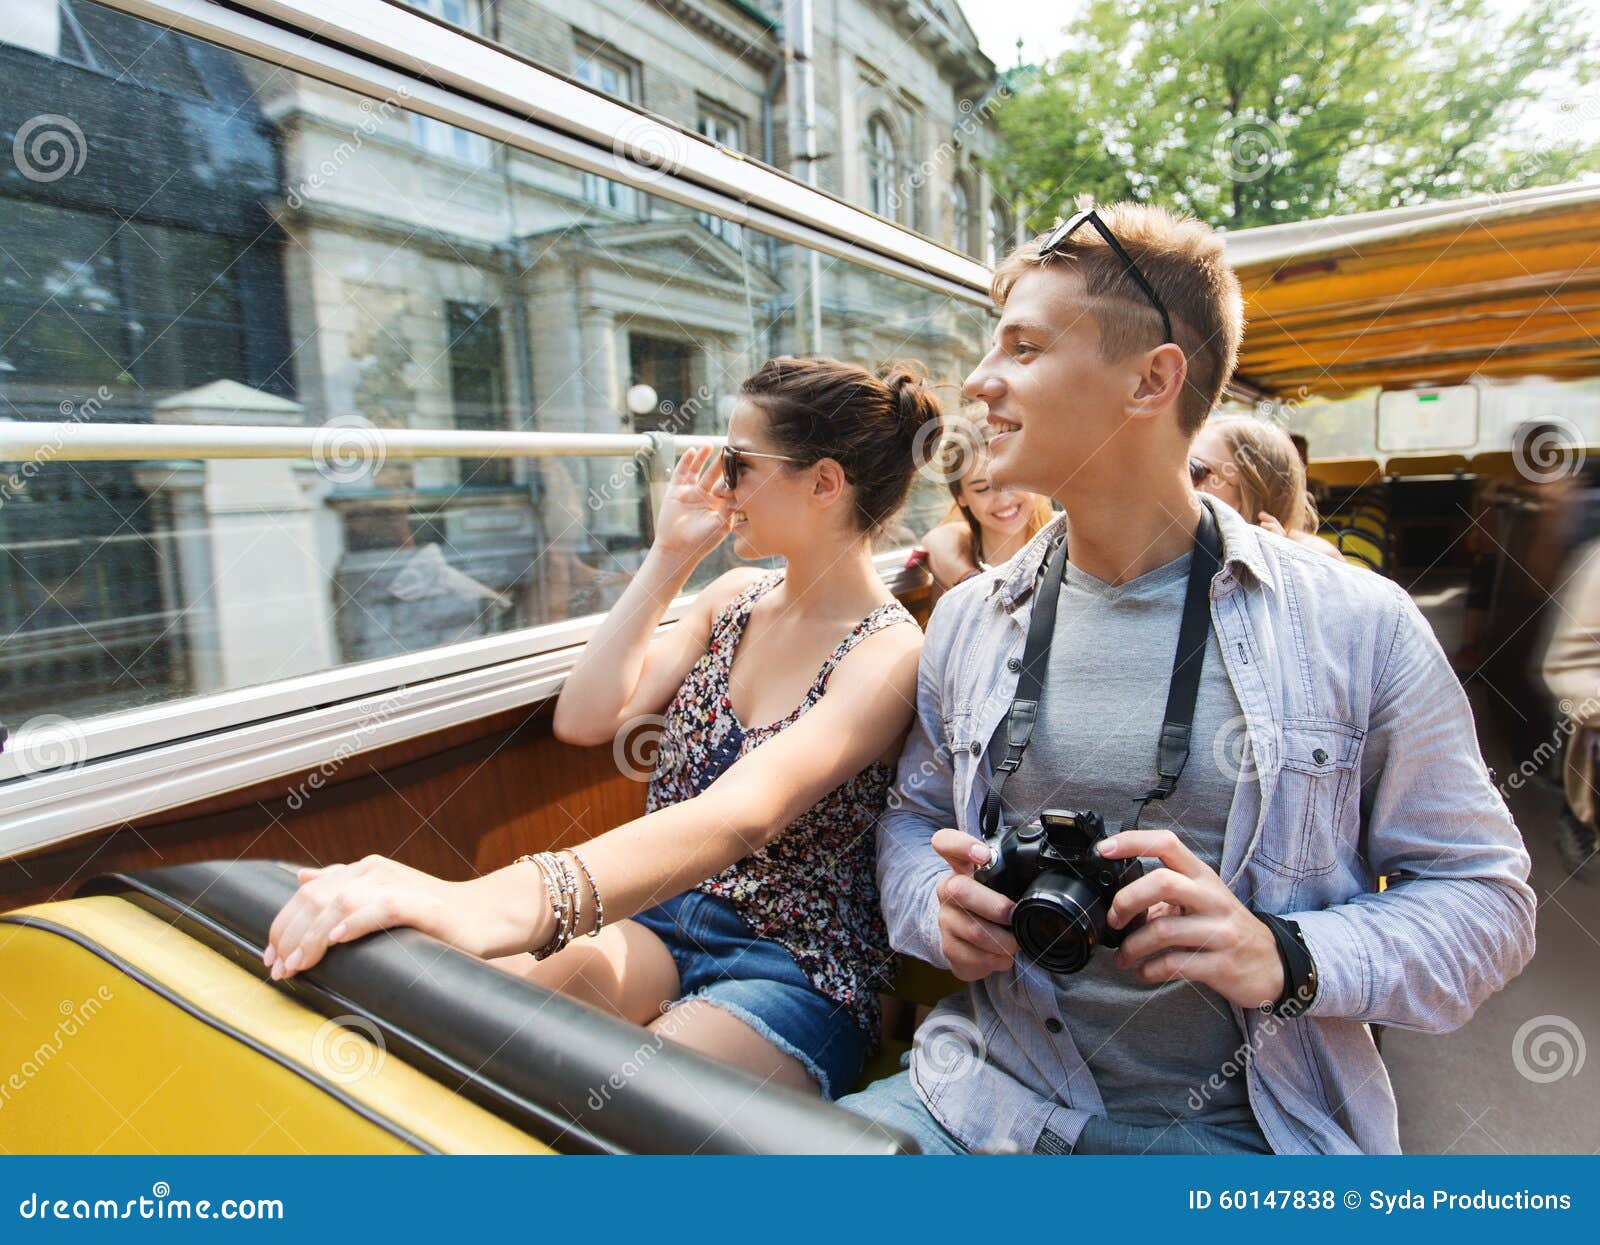 Smiling Couple With Camera Traveling By Tour Bus Stock